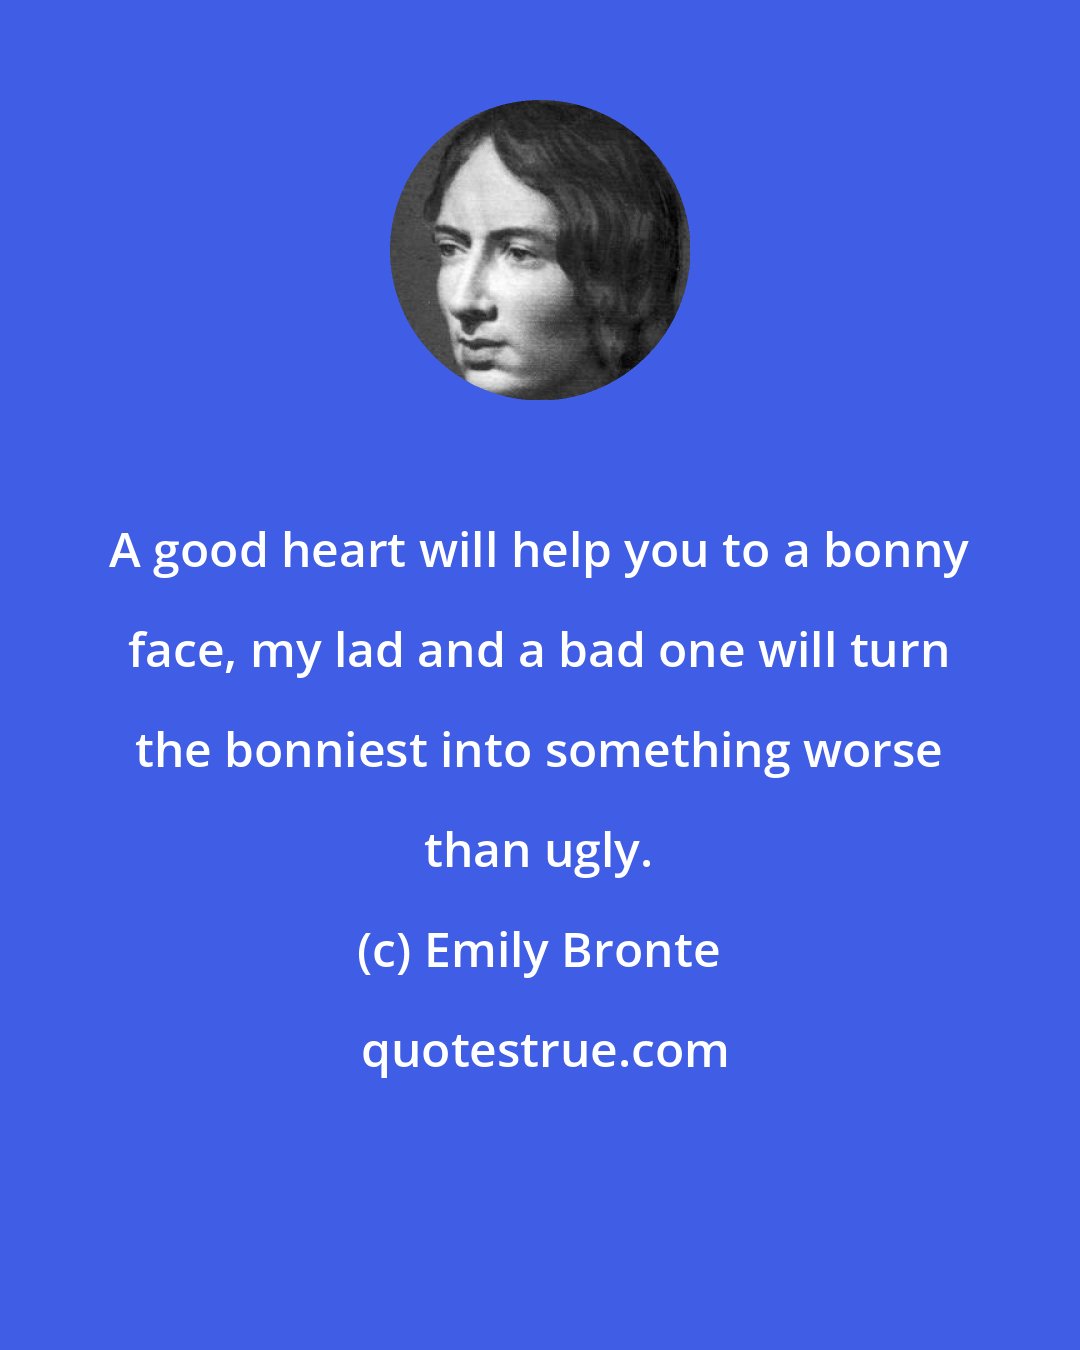 Emily Bronte: A good heart will help you to a bonny face, my lad and a bad one will turn the bonniest into something worse than ugly.